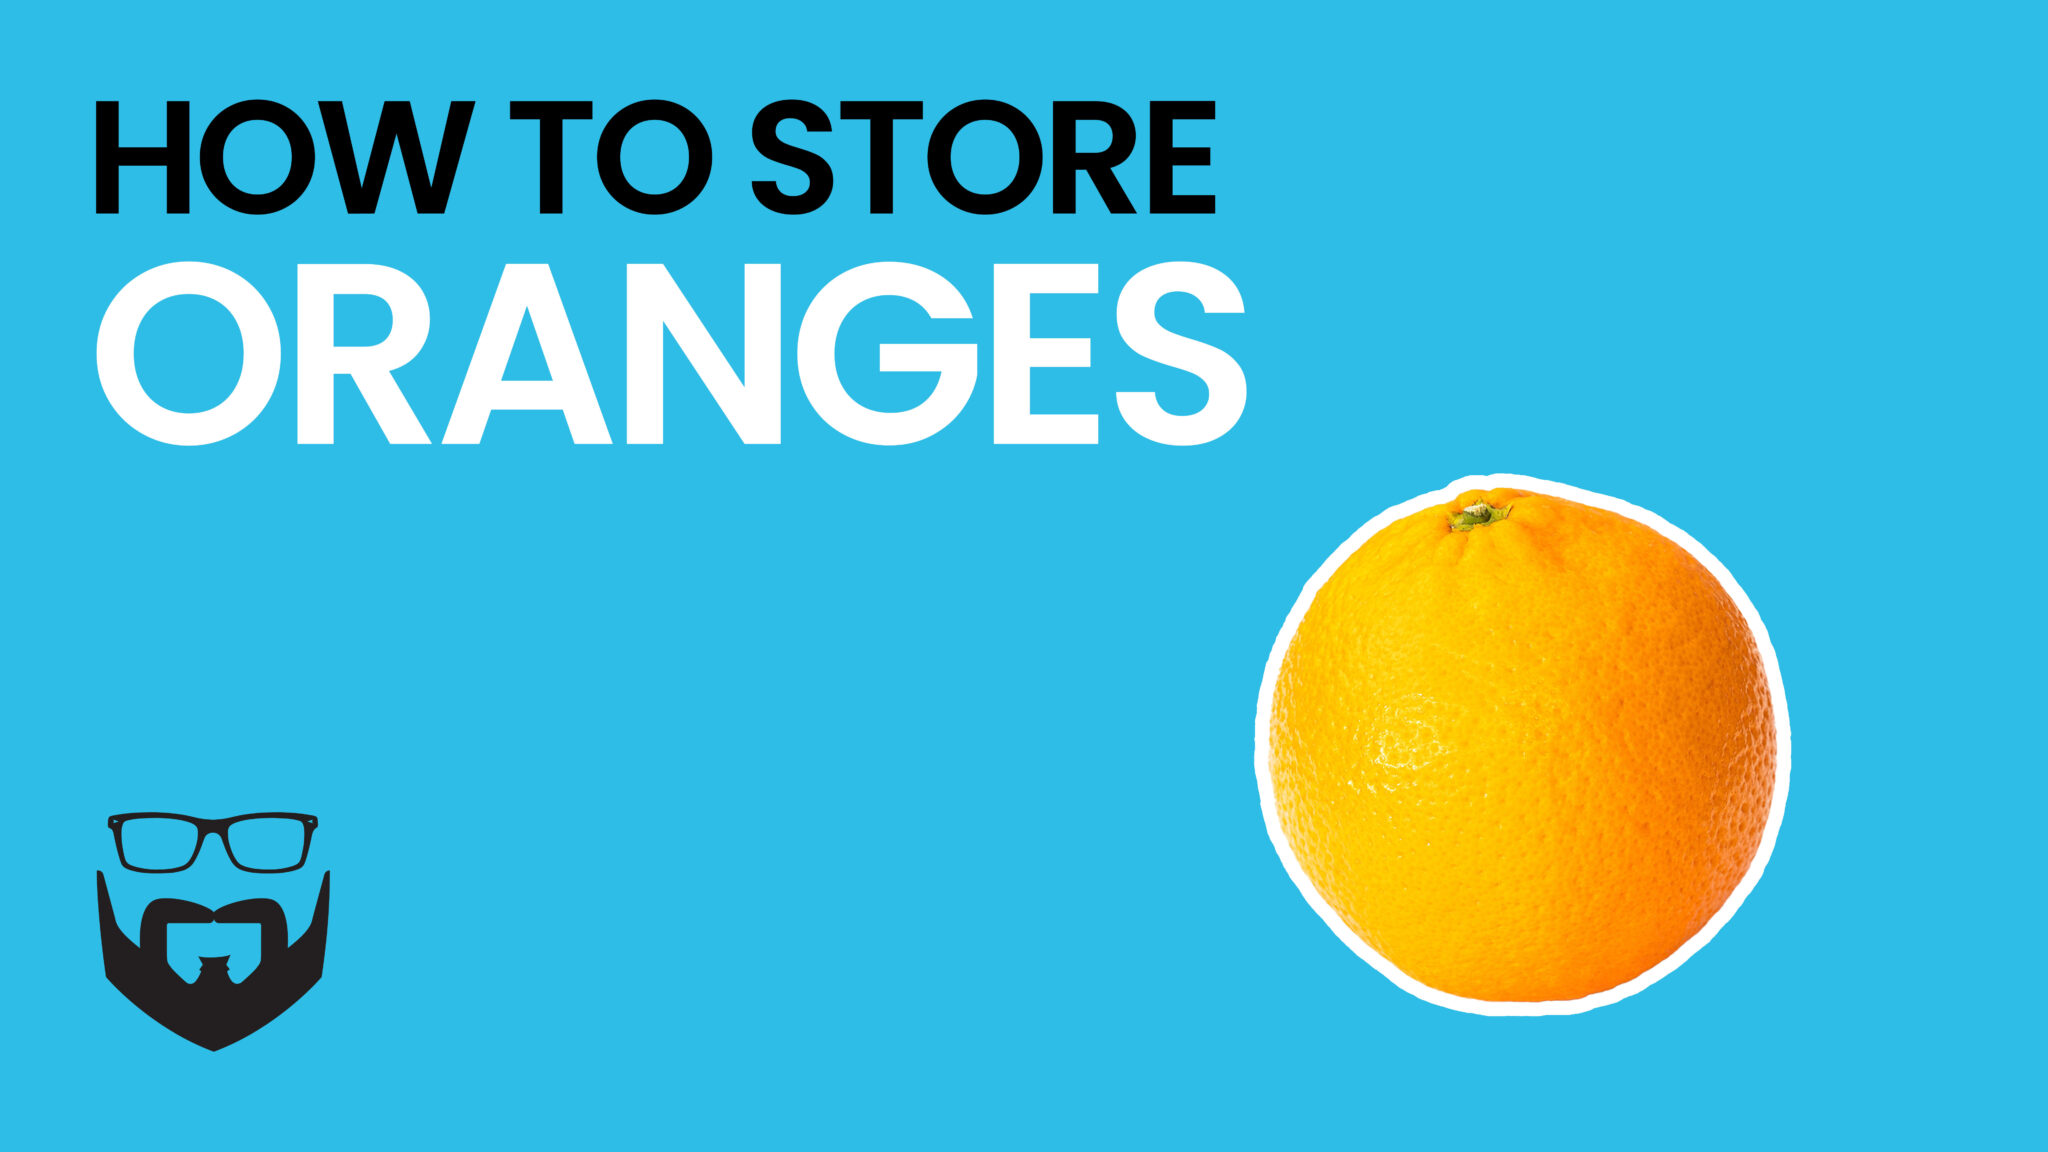 How to Store Oranges Video - Blue